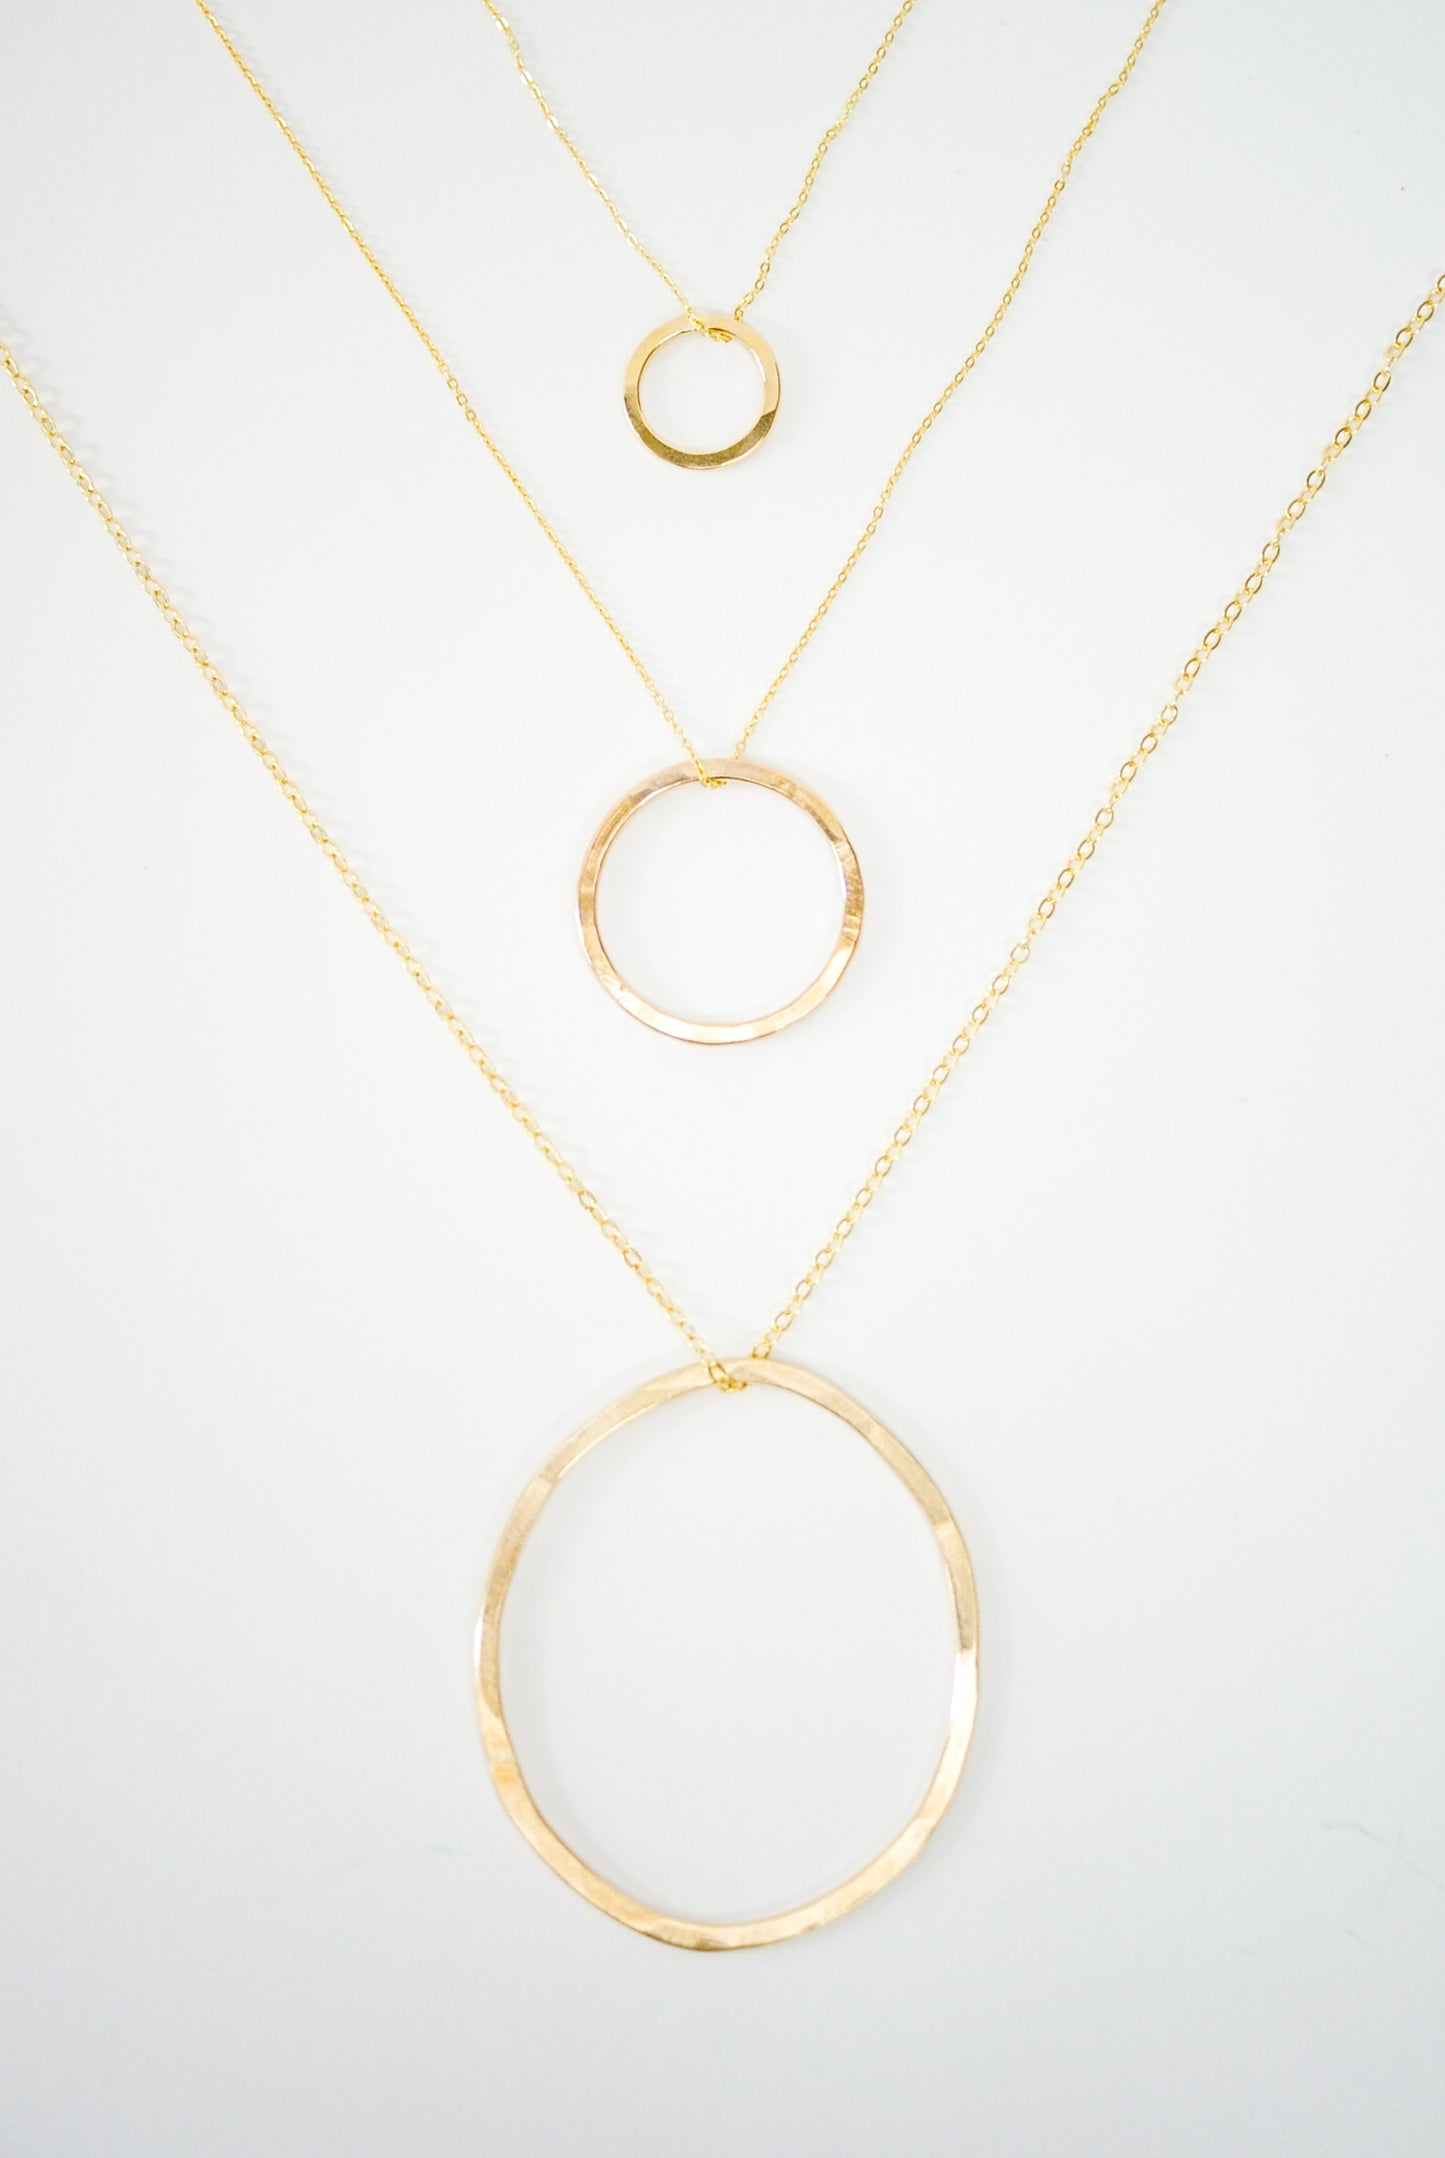 Mini Circle Necklace, Gold Fill, Rose Gold Fill, or Sterling Silver